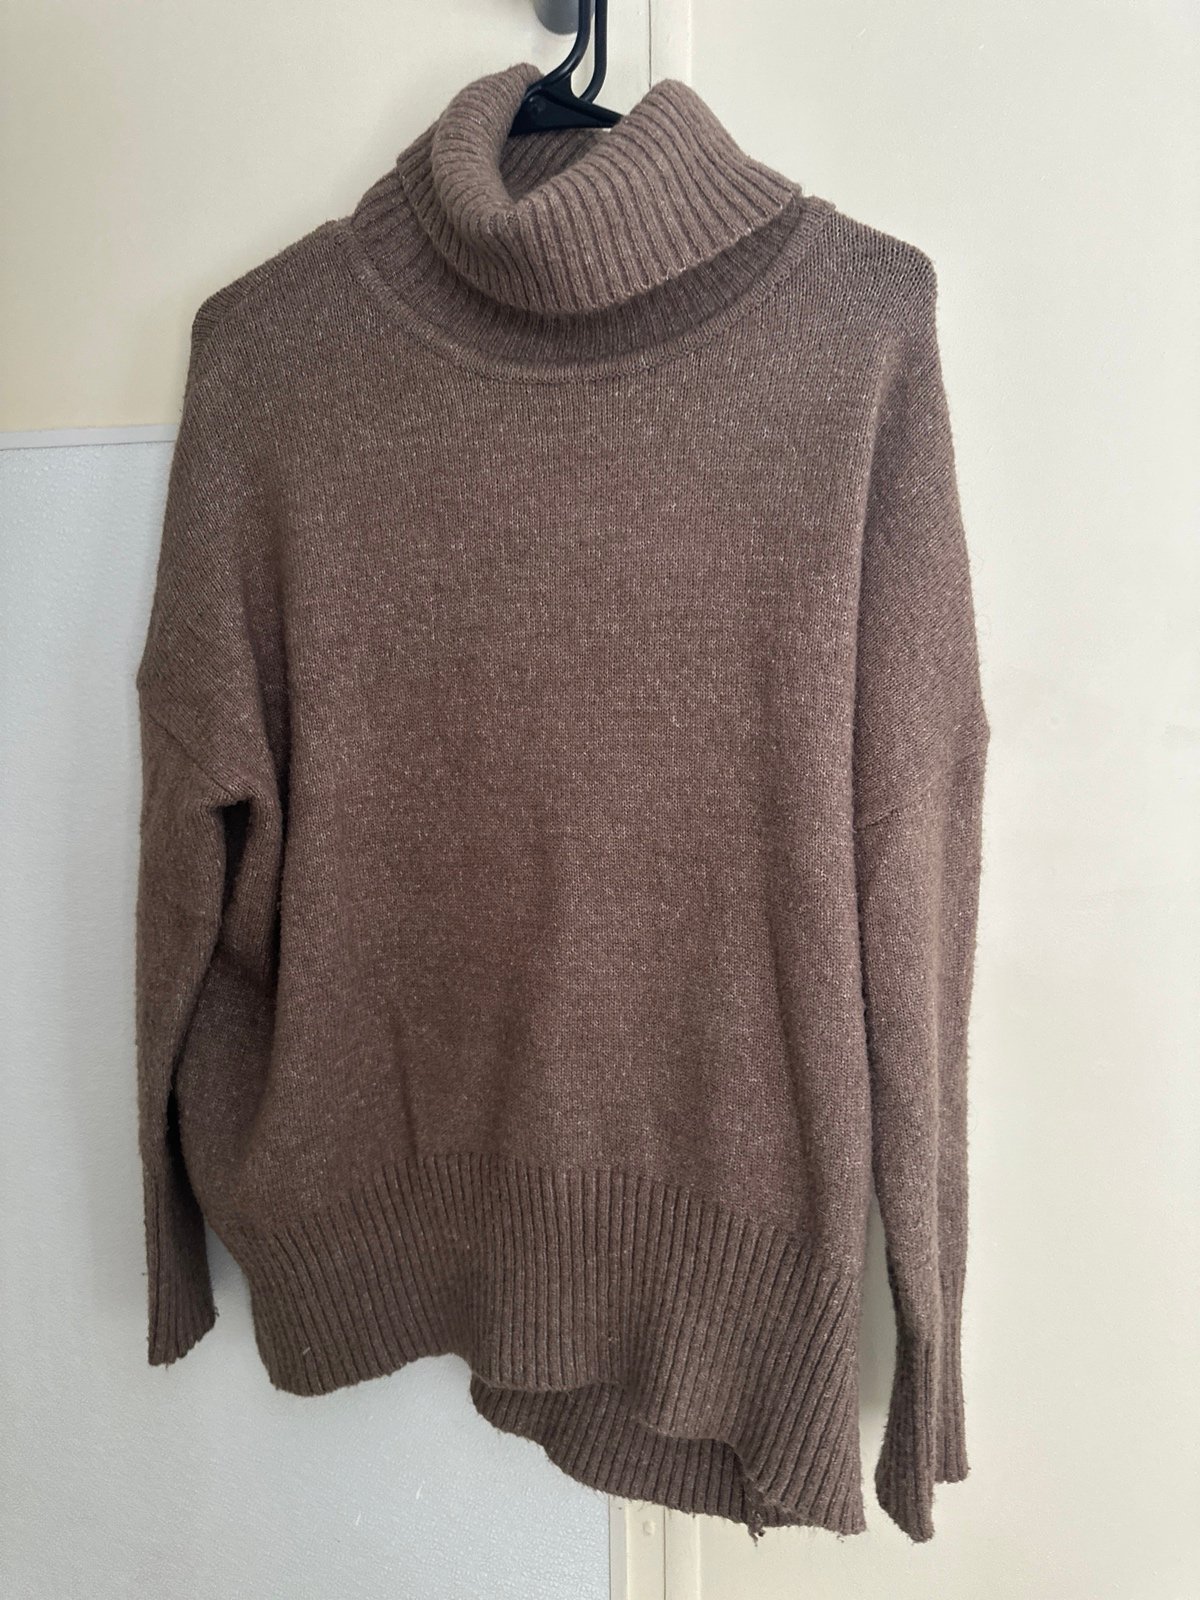 High quality Women’s sweater size small lSK0Fm8I4 just 